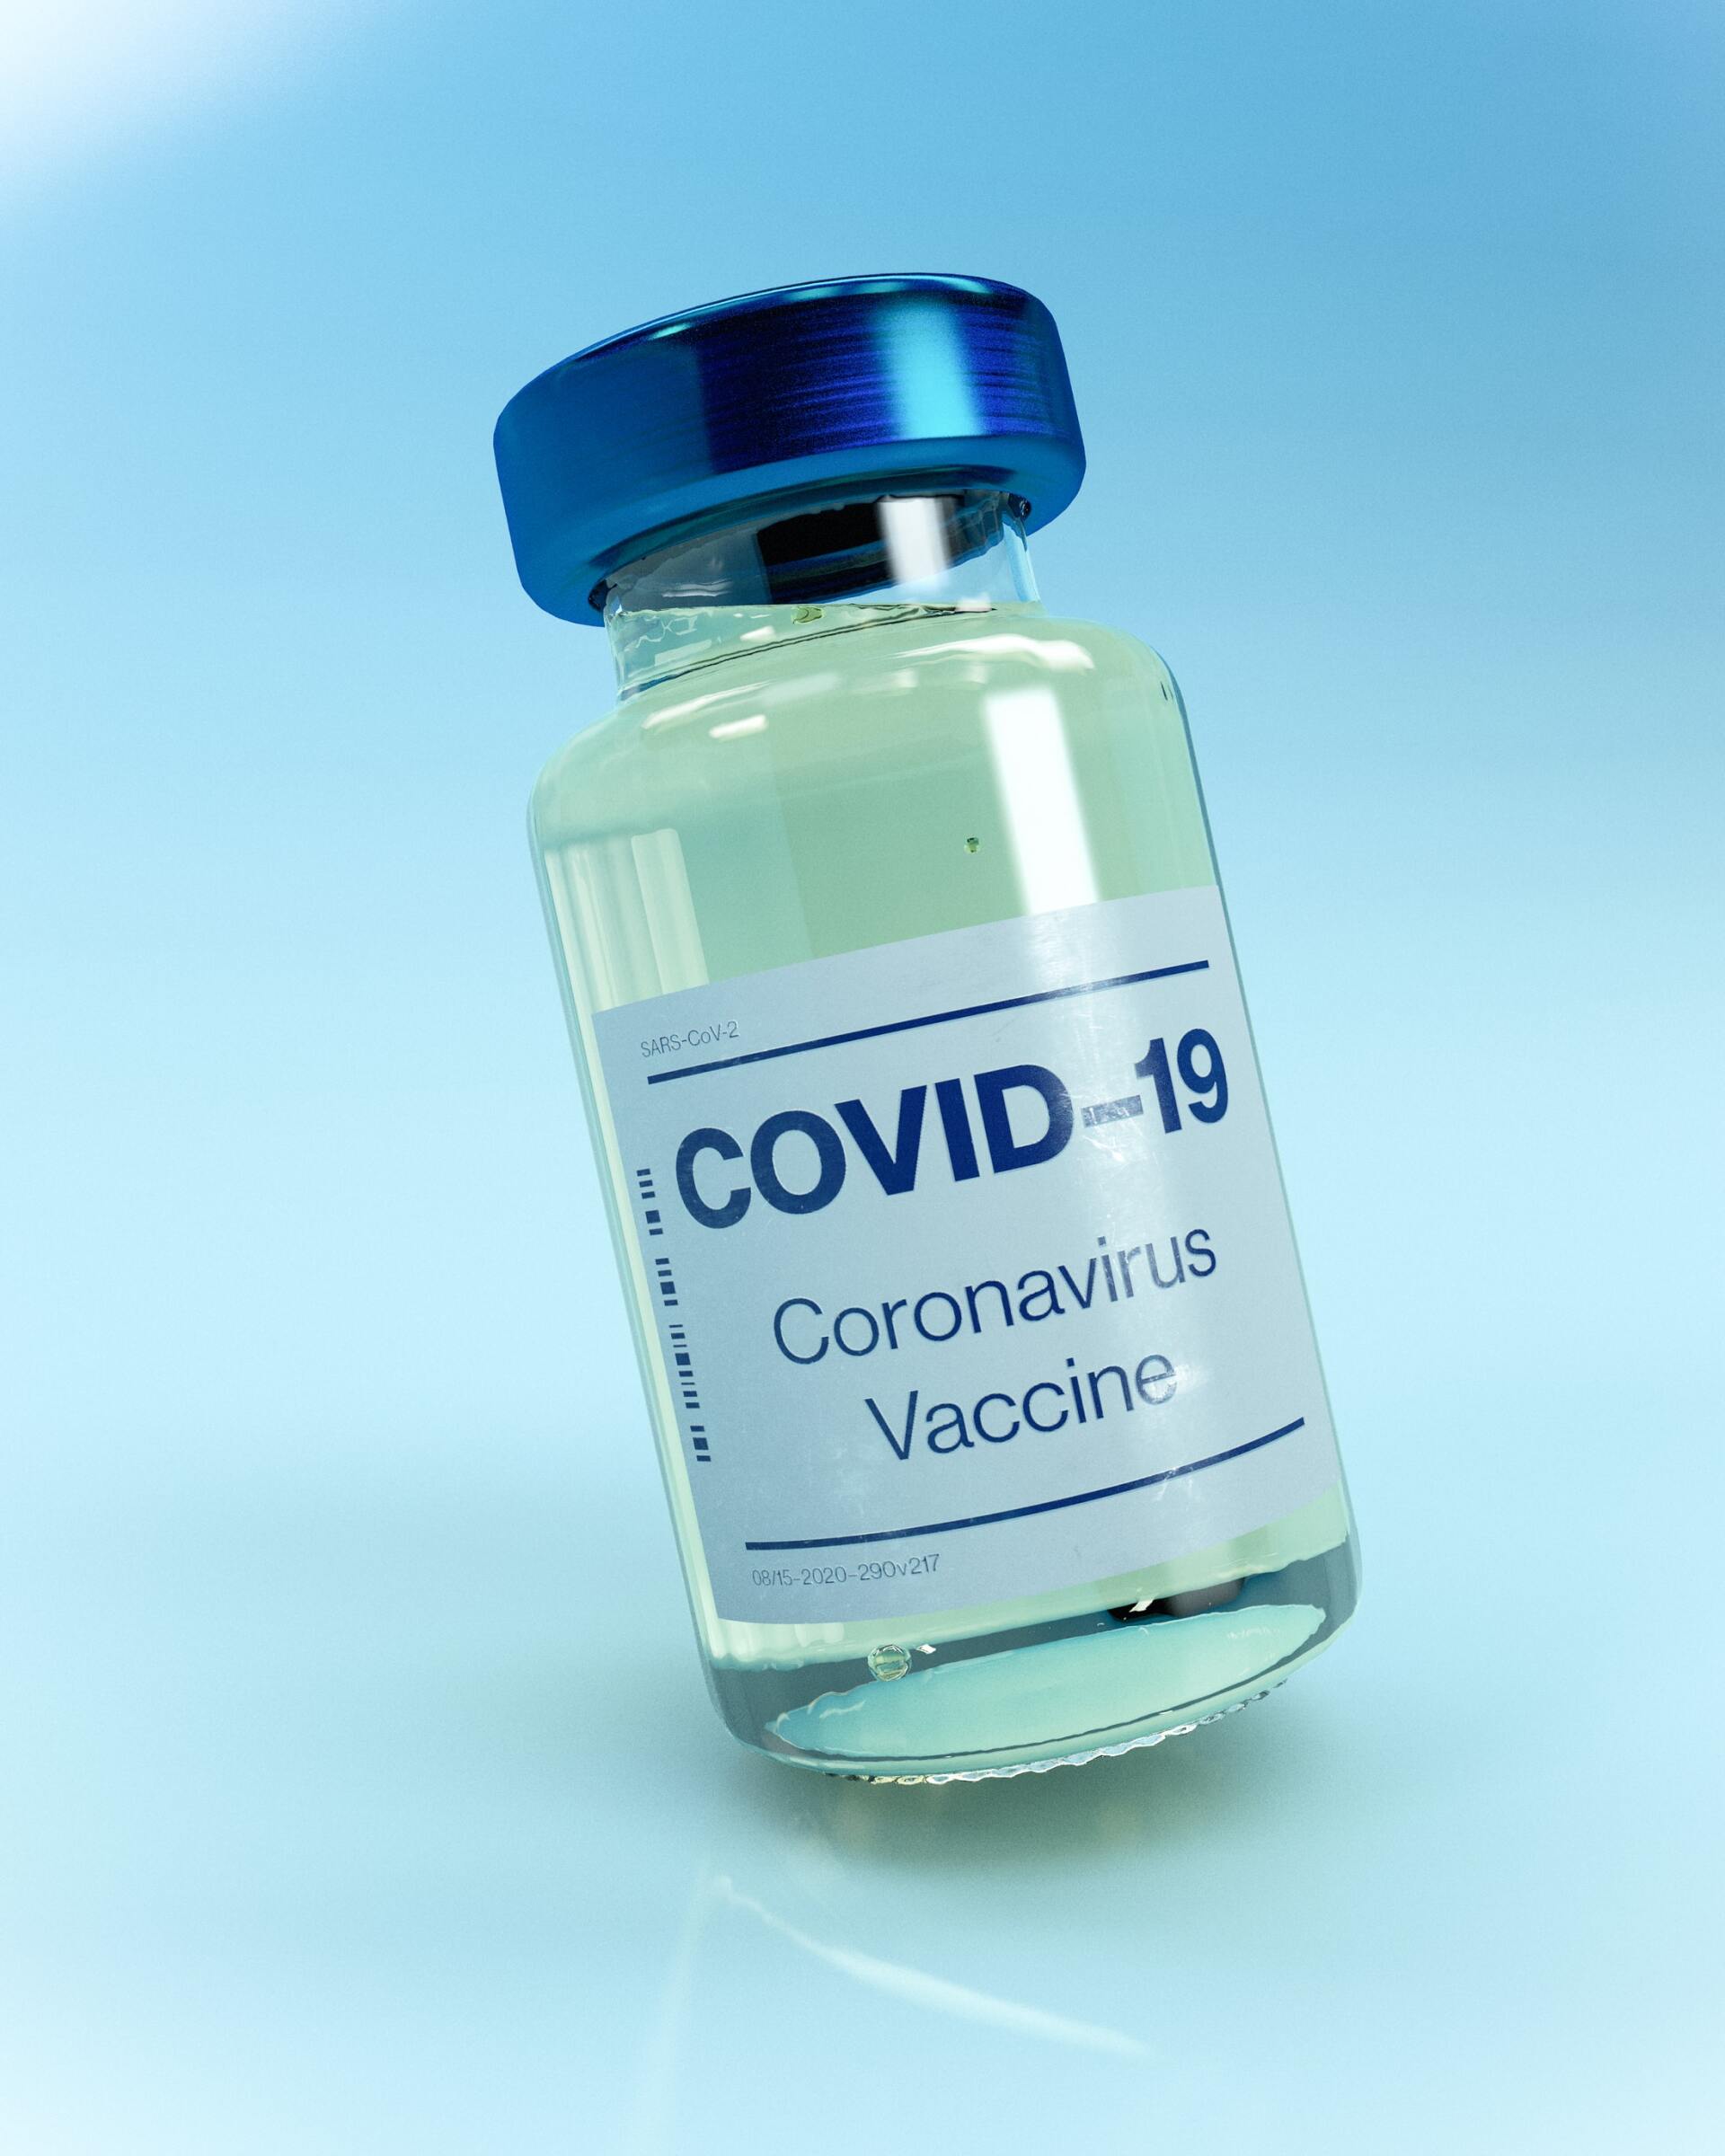 Facts about Covid 19 Vaccine